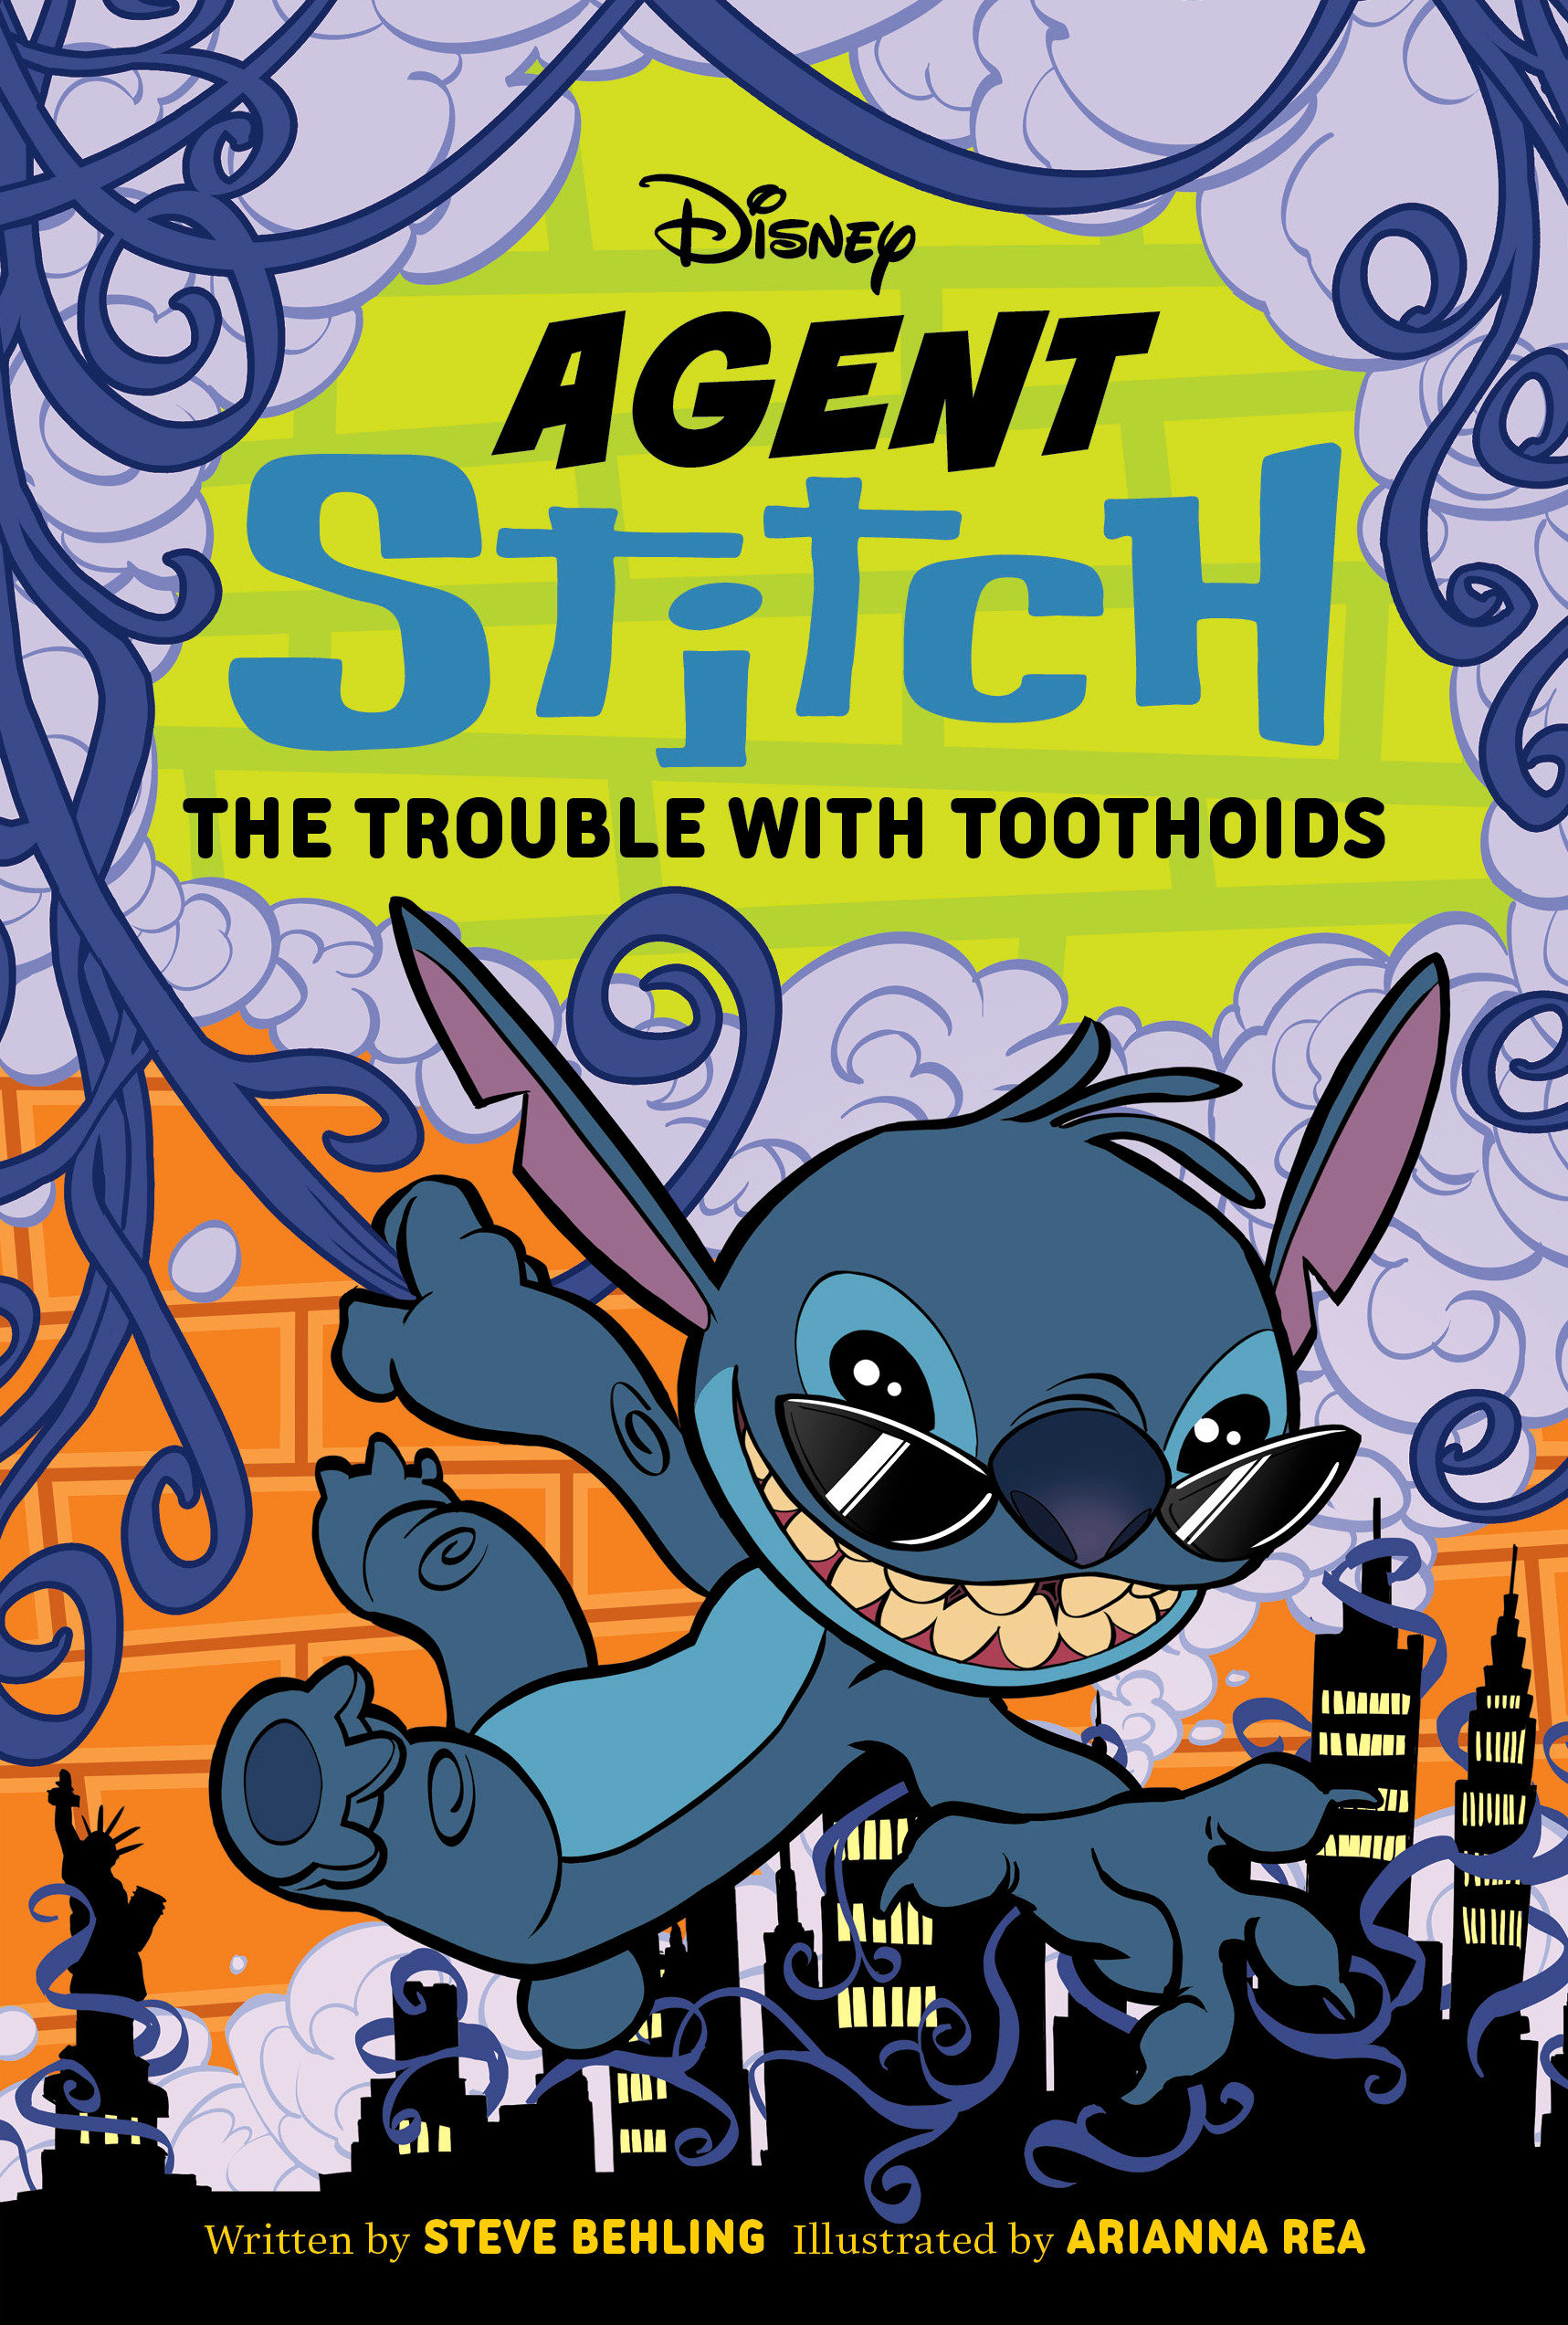 Agent Stitch: The Trouble With Toothoids (Hardcover Book)